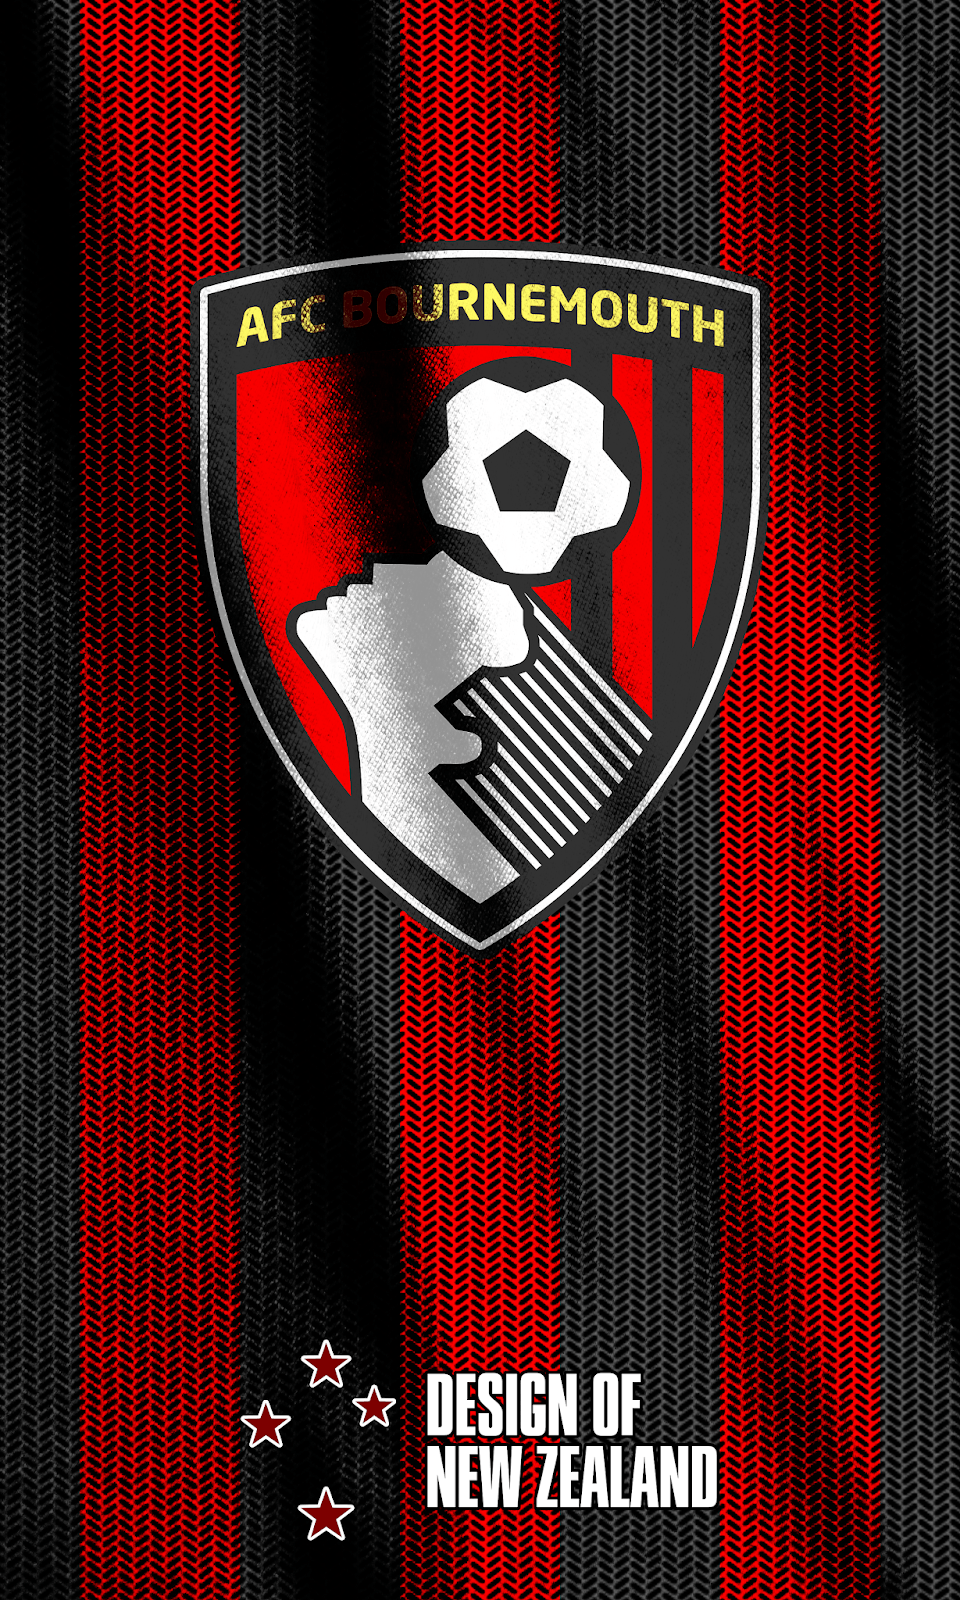 Wallpaper AFC Bournemouth. The Football Illustrated, Inc. AFC